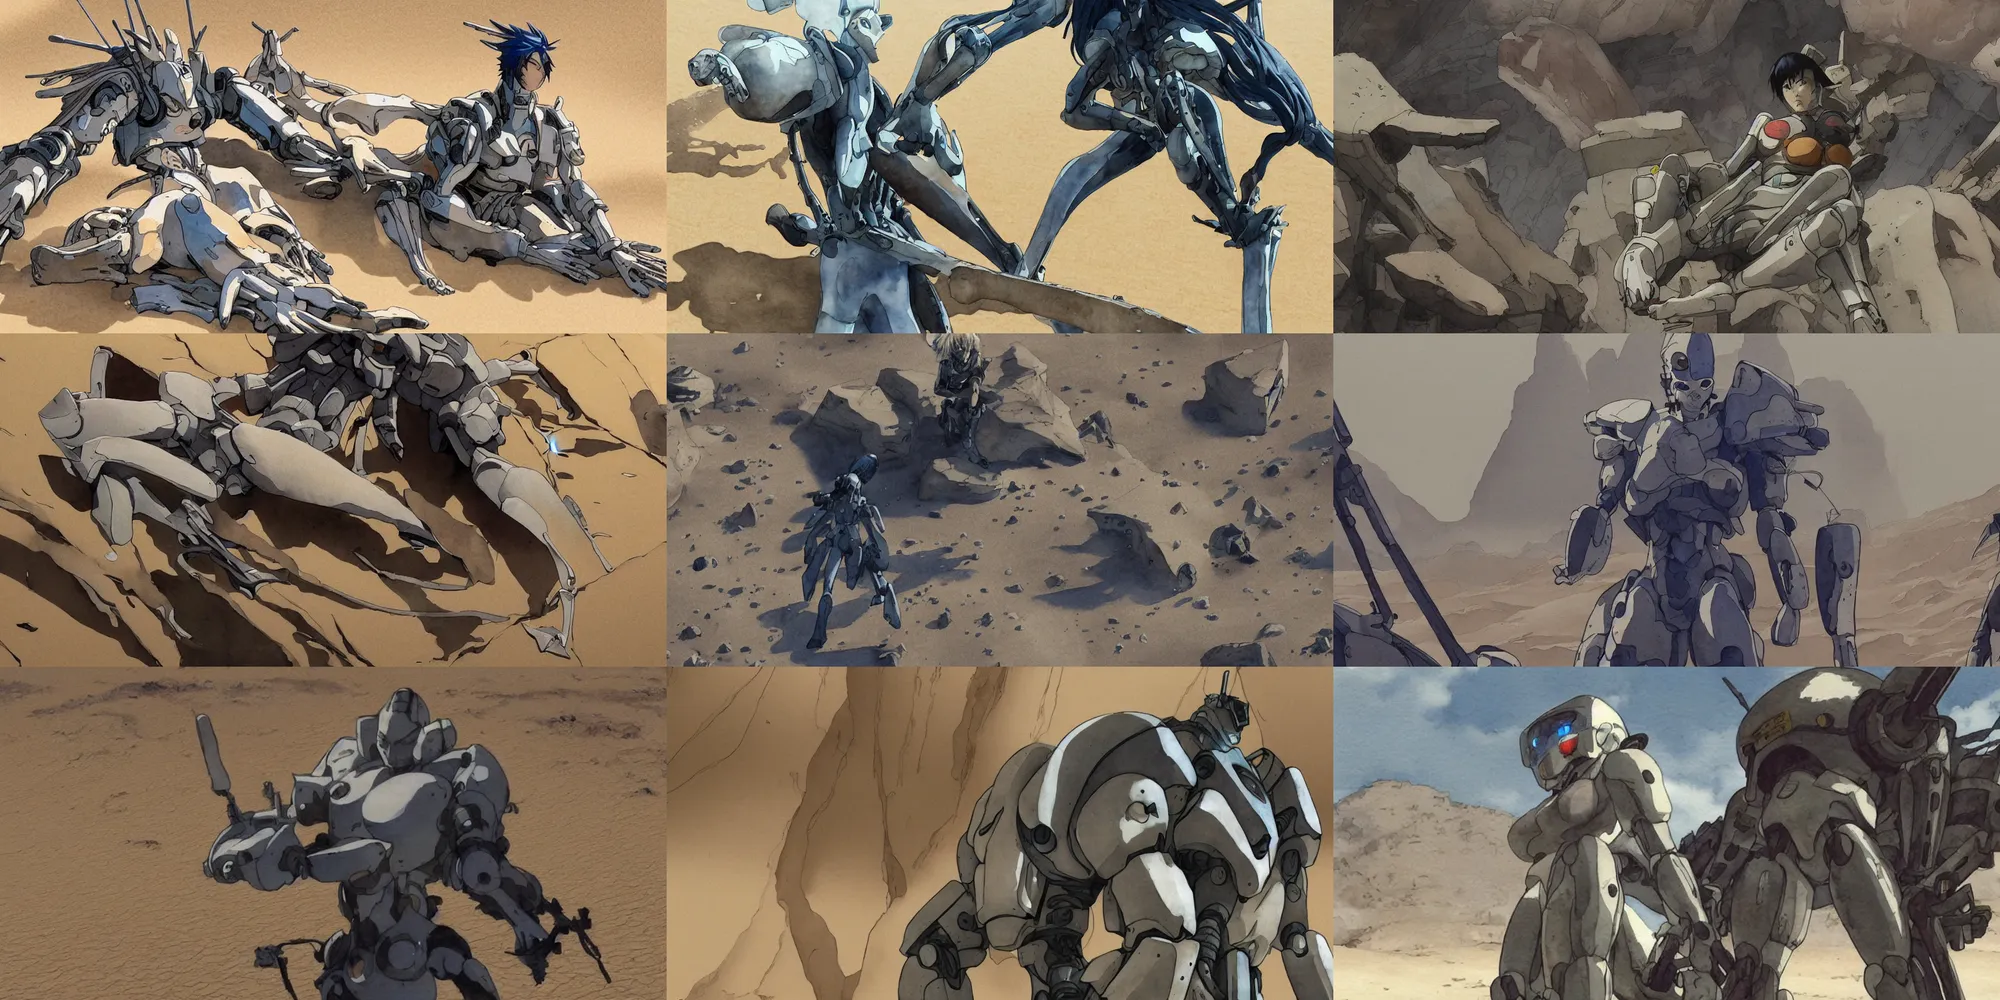 Prompt: incredible screenshot, simple watercolor, masamune shirow ghost in the shell movie scene close up broken Kusanagi, Giant robot head, giant robot bones, spine and ribs in the desert sand dunes, in the desert, crazy looking rocks, deep chasm, rock climbing , nausicaa, cracks, brown mud, dust, take cover, bullet holes,, memorable scene, red, blue, orange, cool hair, odd pipes, metallic reflections, refraction, bounce light, phil hale, Yoji Shinkawa, bright rim light, hd, 4k, remaster, dynamic camera angle, deep 3 point perspective, fish eye, dynamic scene